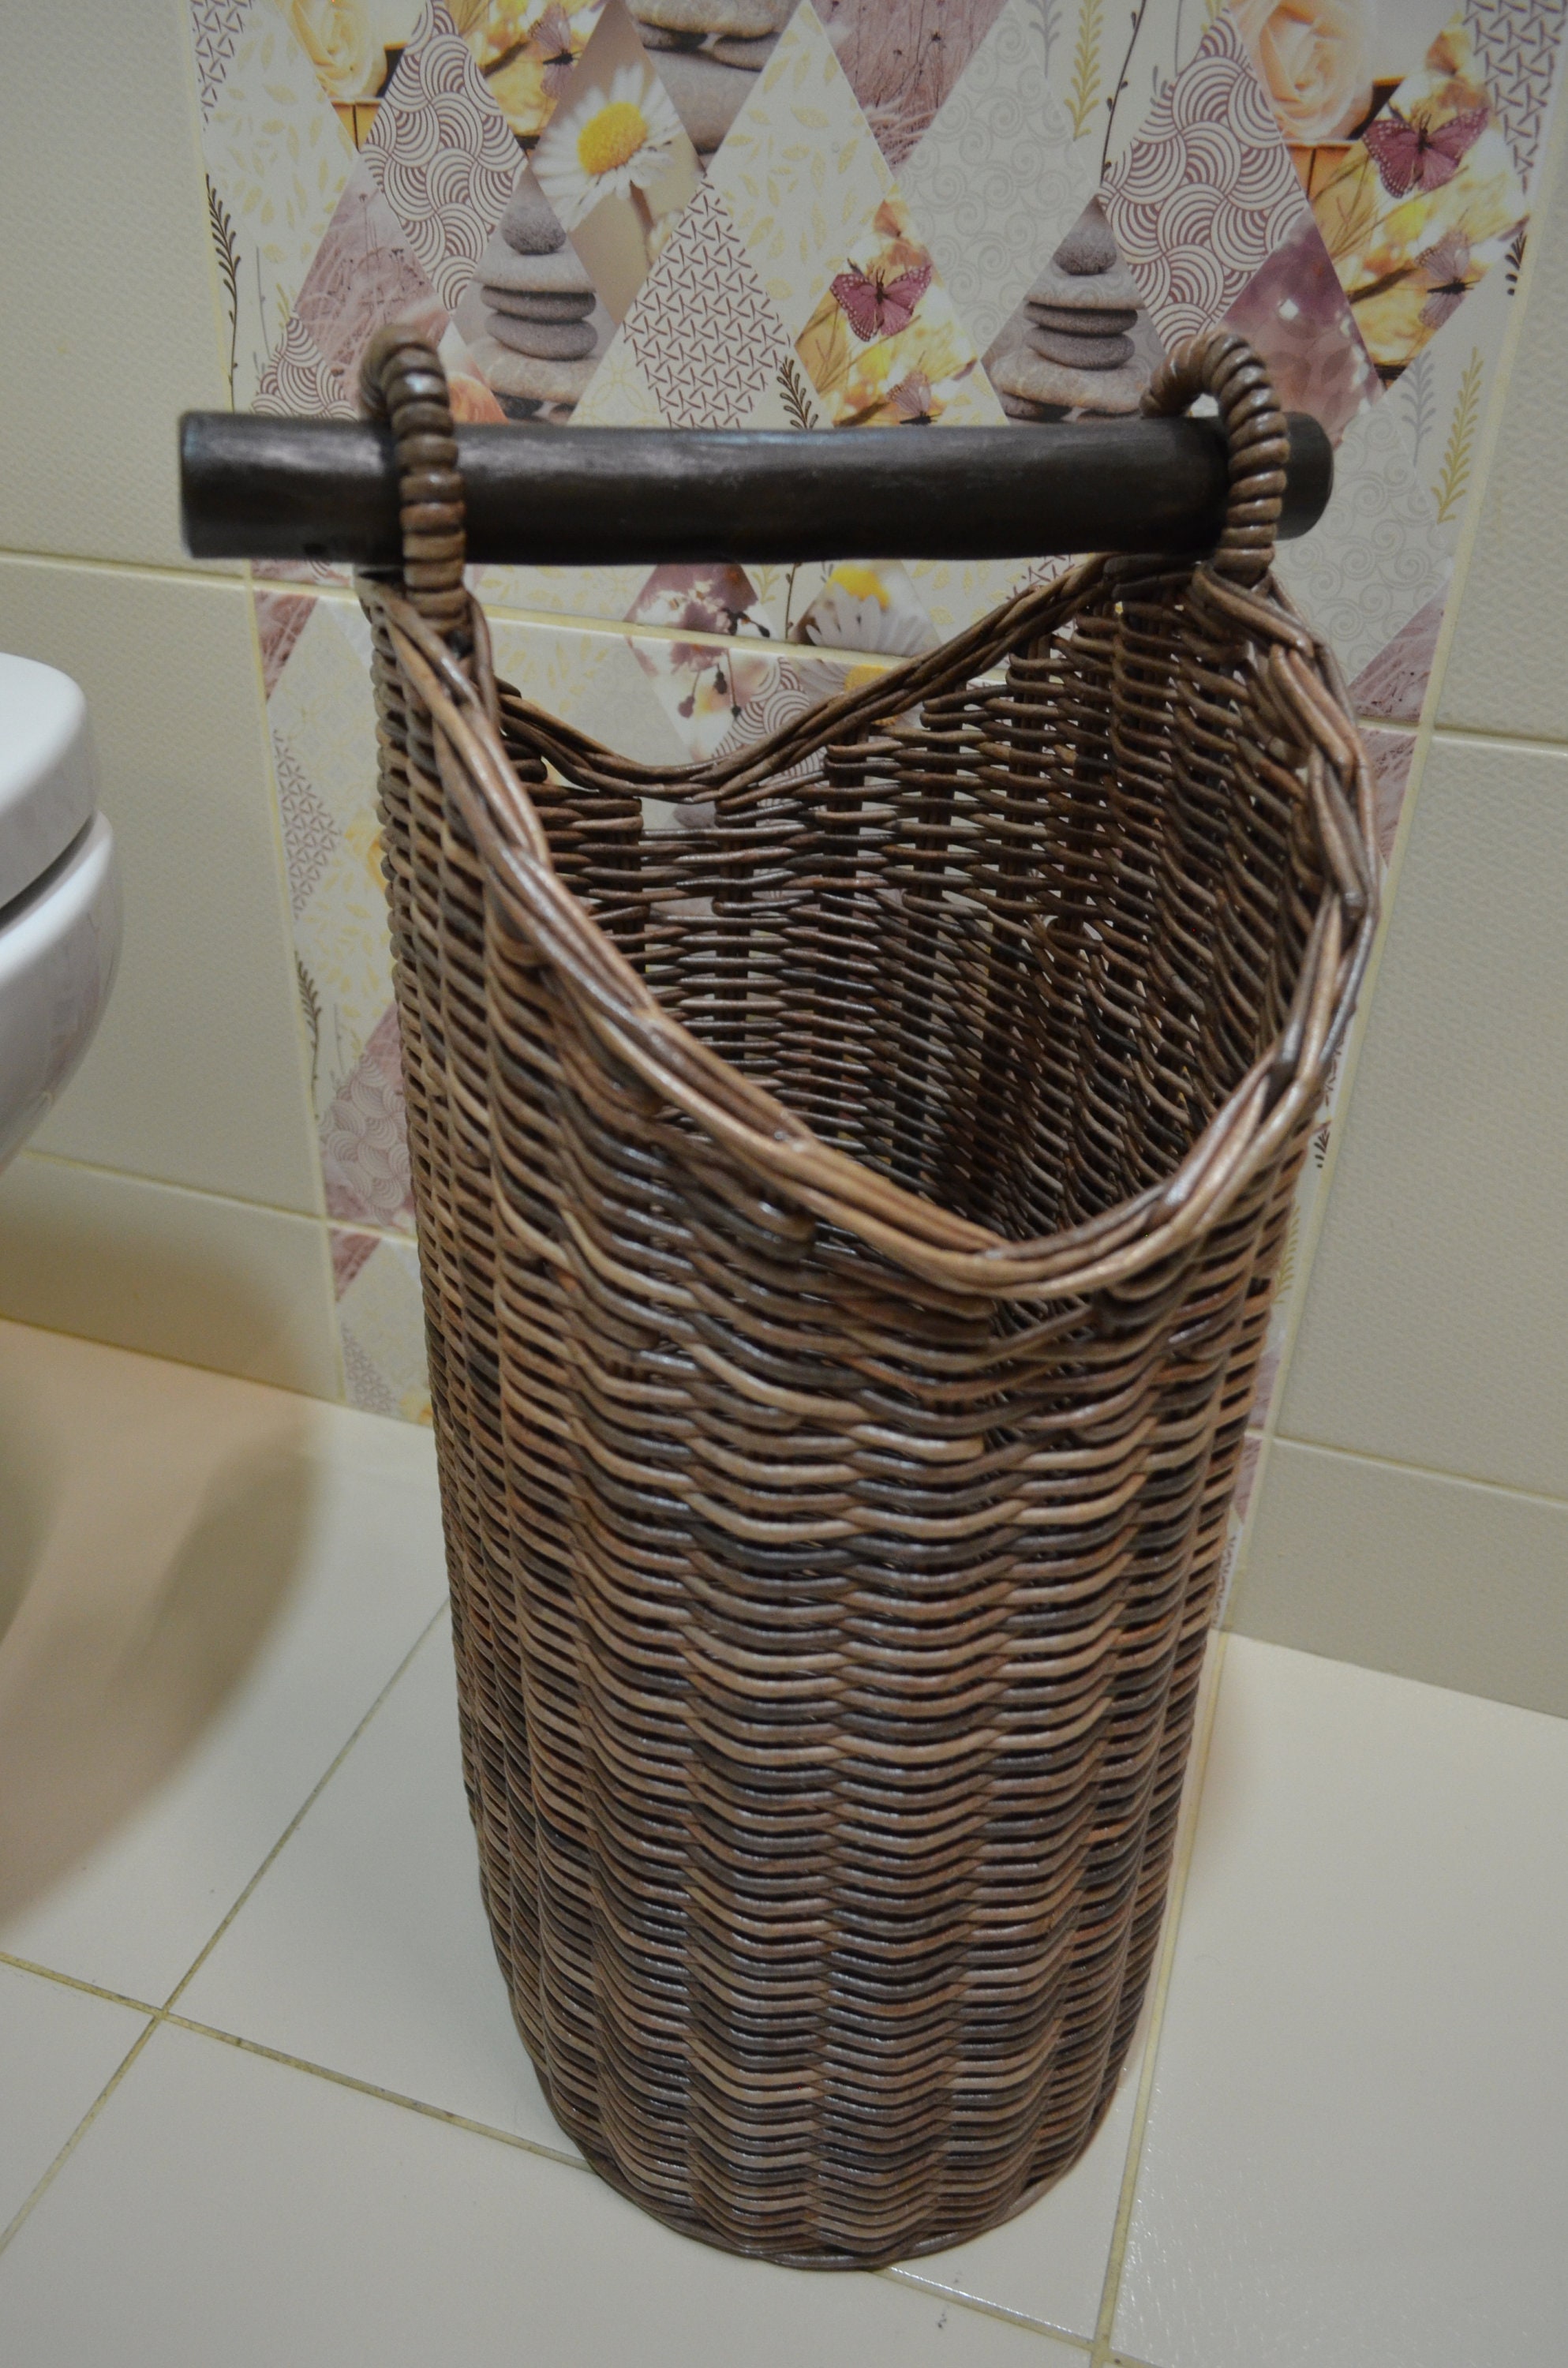 Labcosi Bathroom Baskets for Organizing, Toilet Paper Basket Organizer,  Handwoven Seagrass Wicker Storage Baskets with Faux Leather Handles for